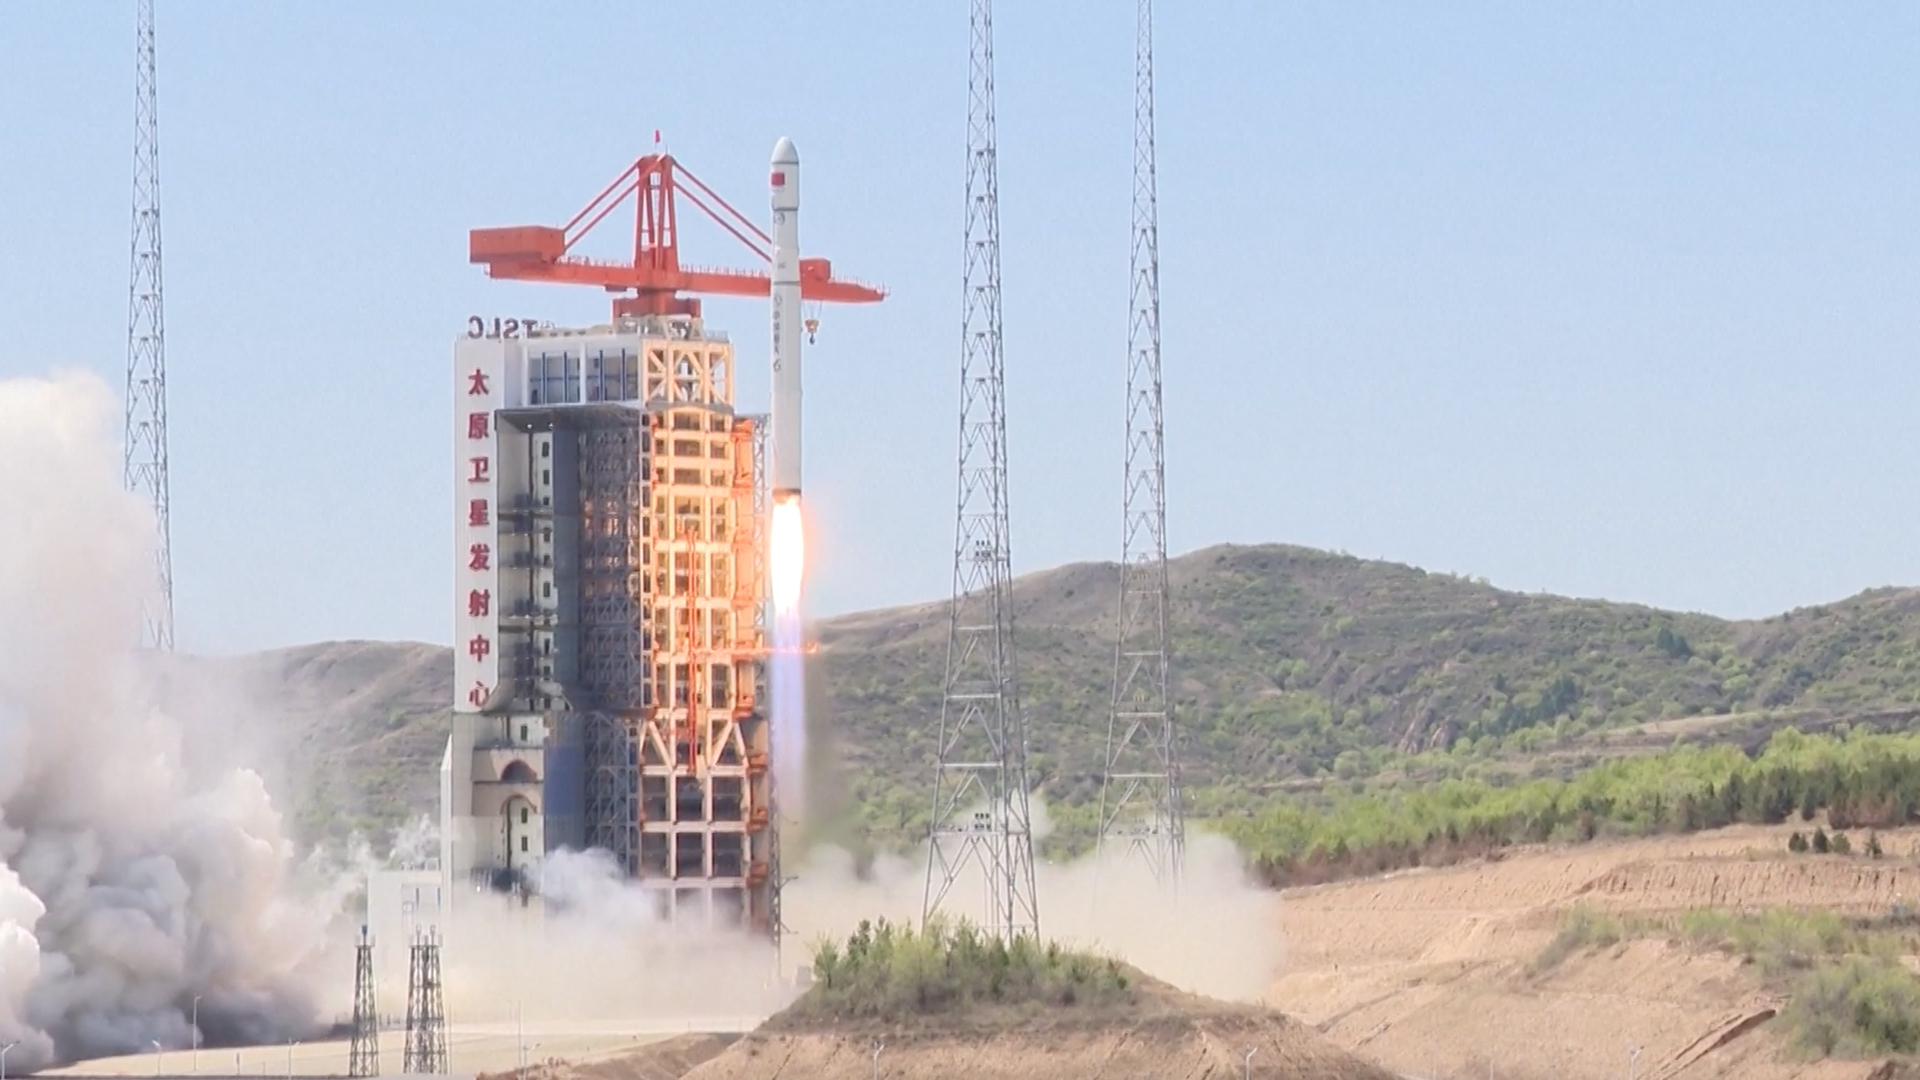 China launches 4 satellites on 1st flight of new Long March 6C rocket (video)